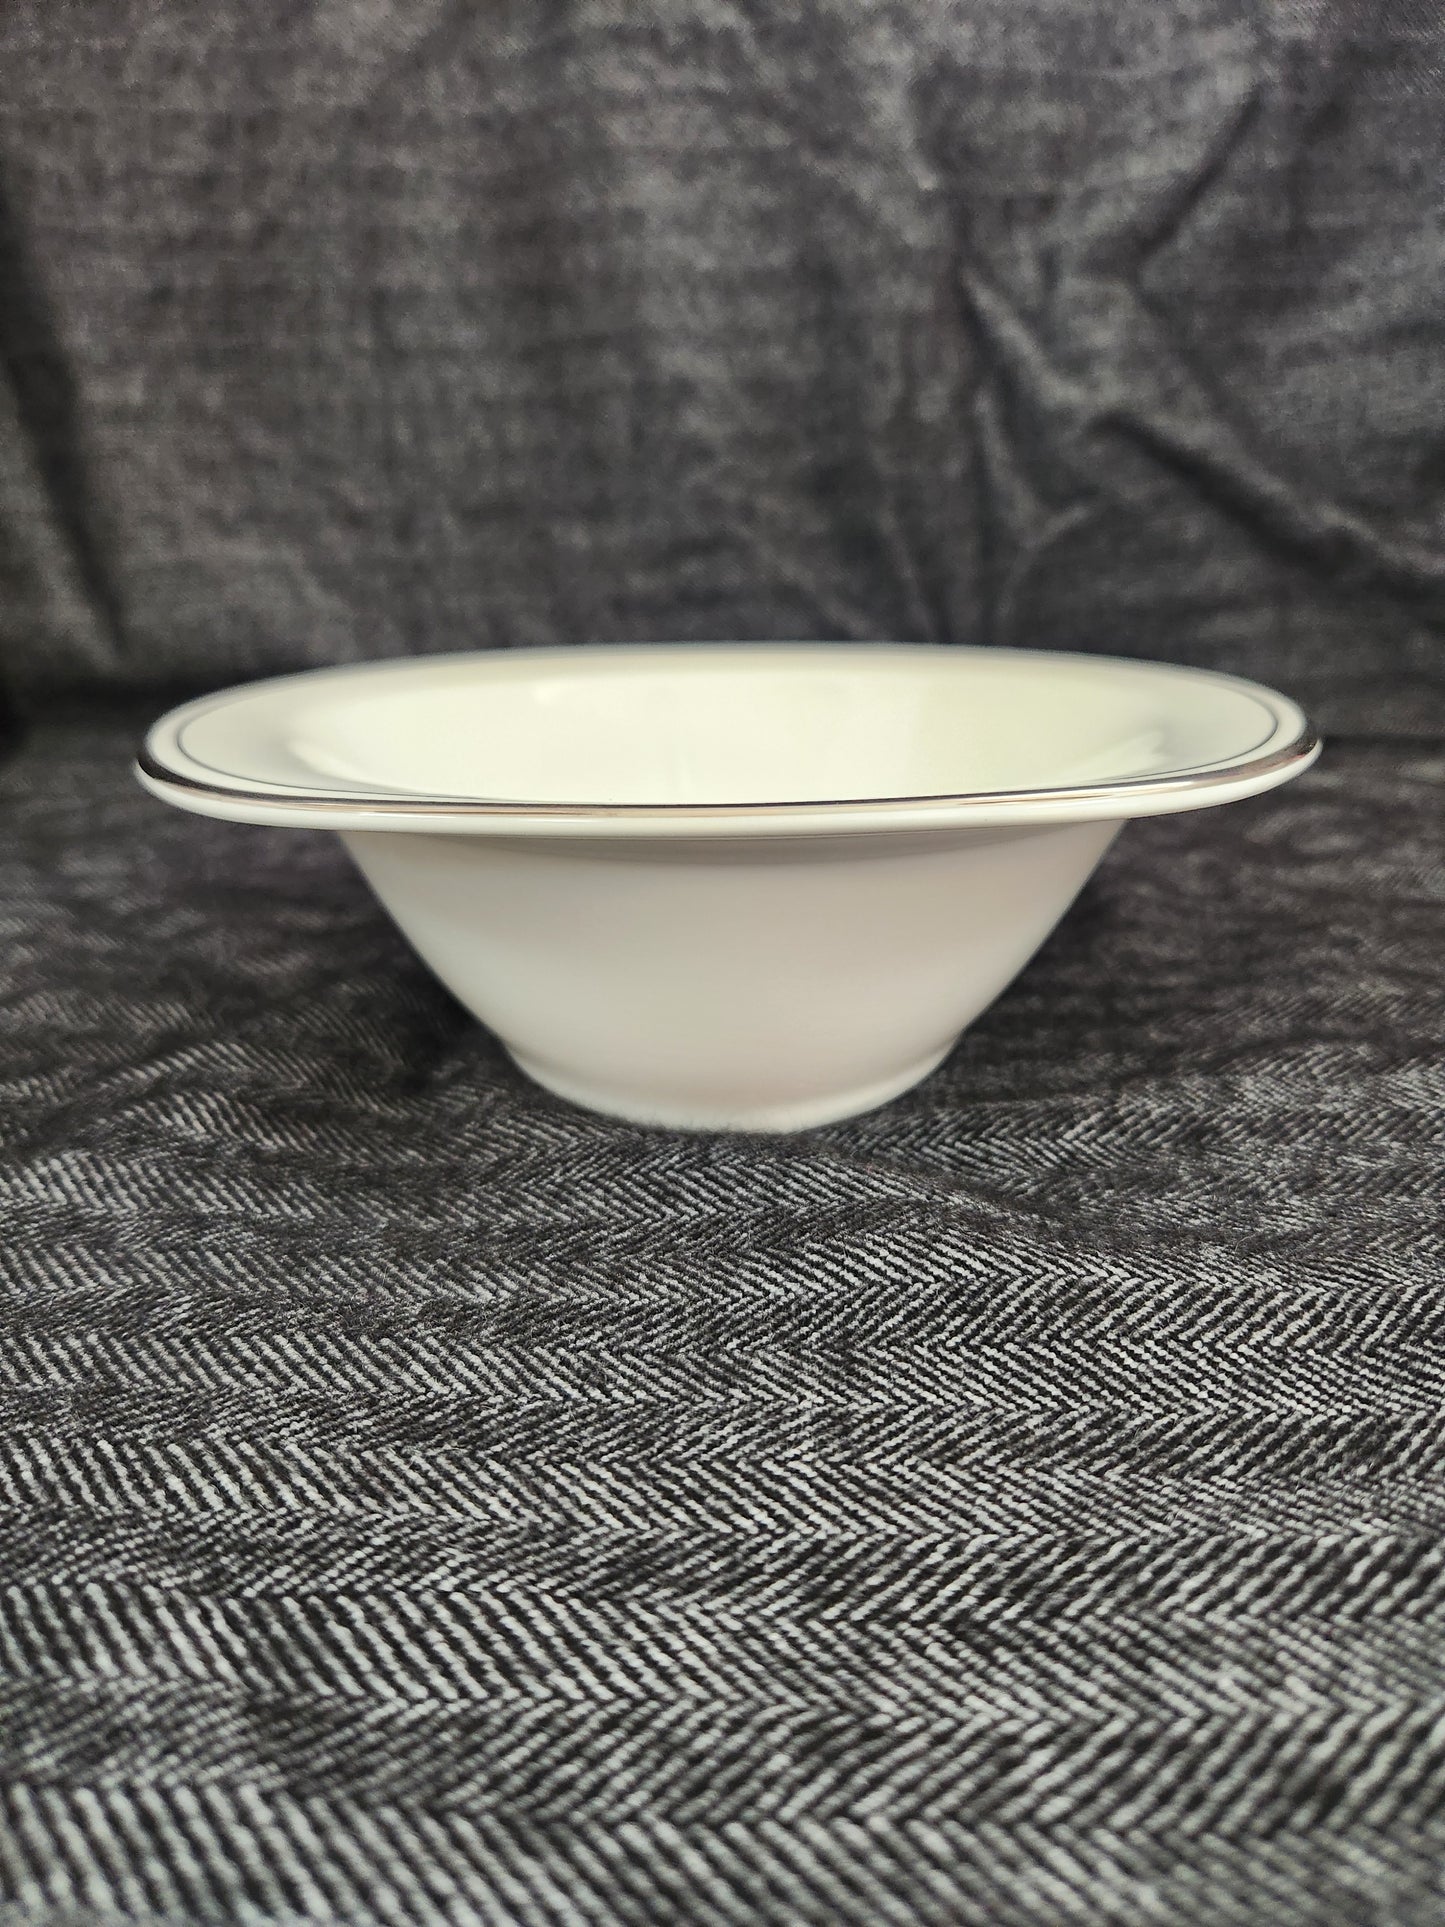 Concord Platinum 11" Oval Vegetable Bowl by Royal Doulton - #H5048